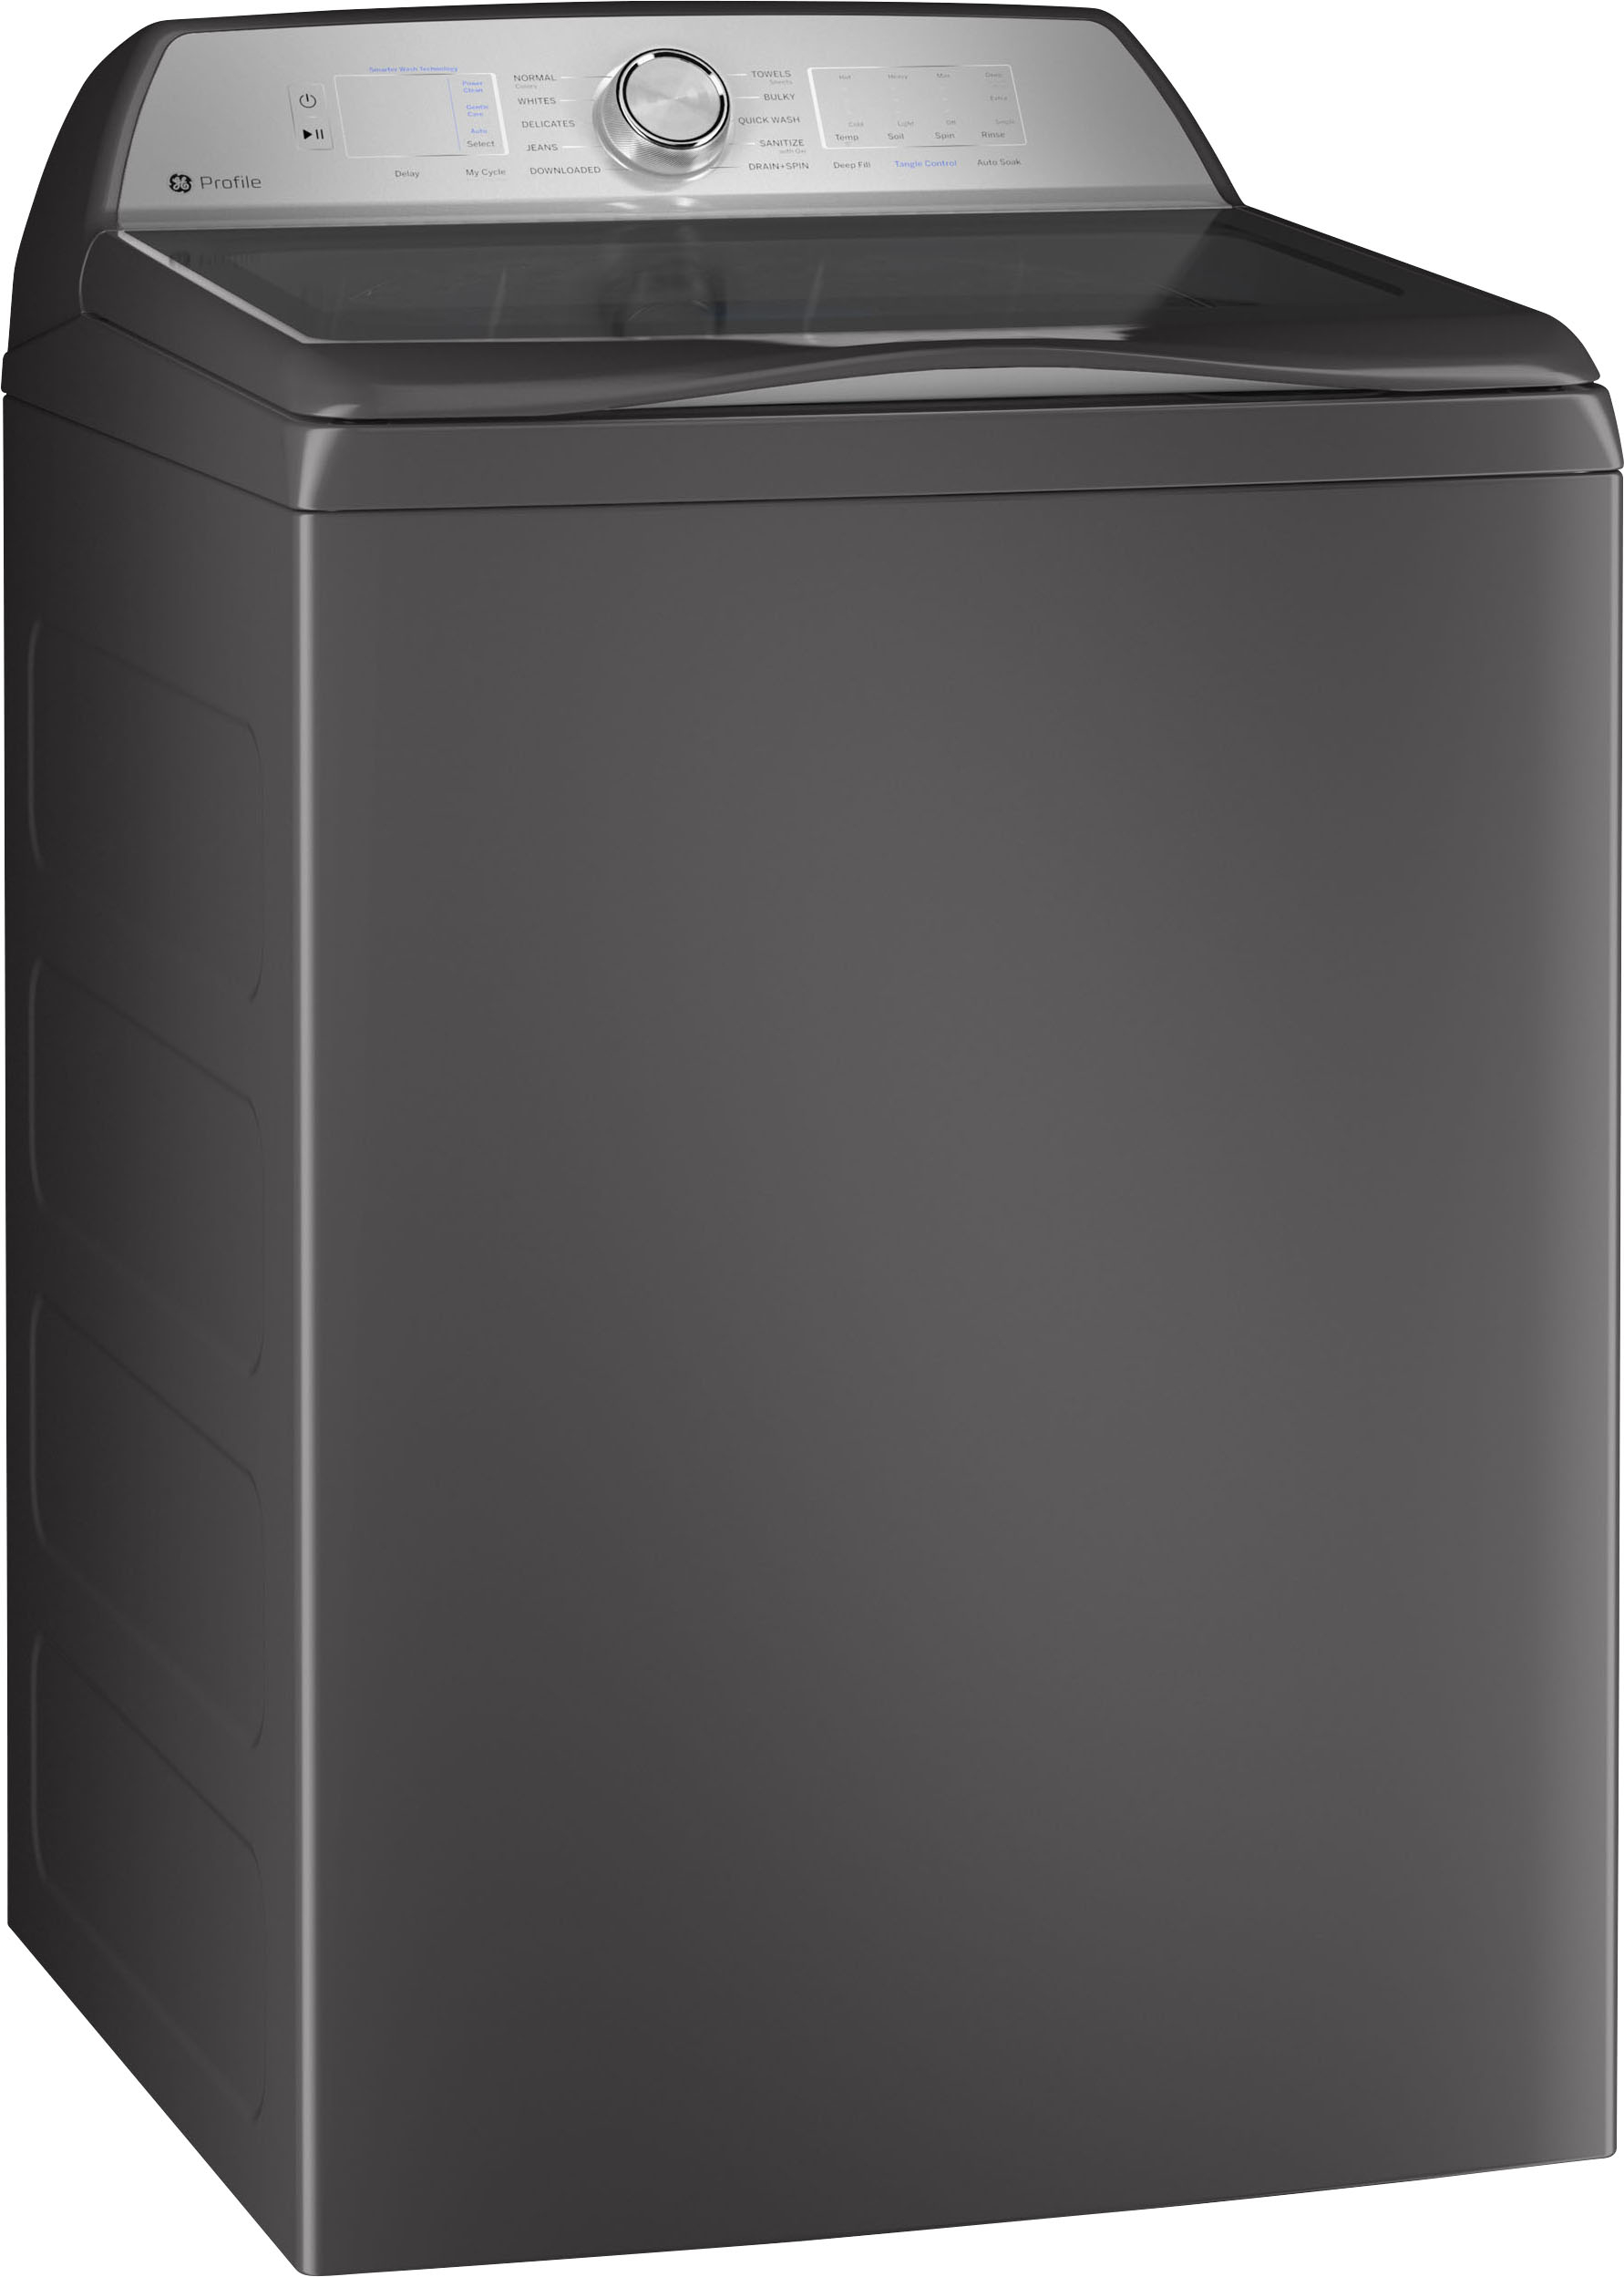 Angle View: GE Profile - 5.0 Cu Ft High Efficiency Smart Top Load Washer with Smarter Wash Technology, Easier Reach & Microban Technology - Diamond Gray